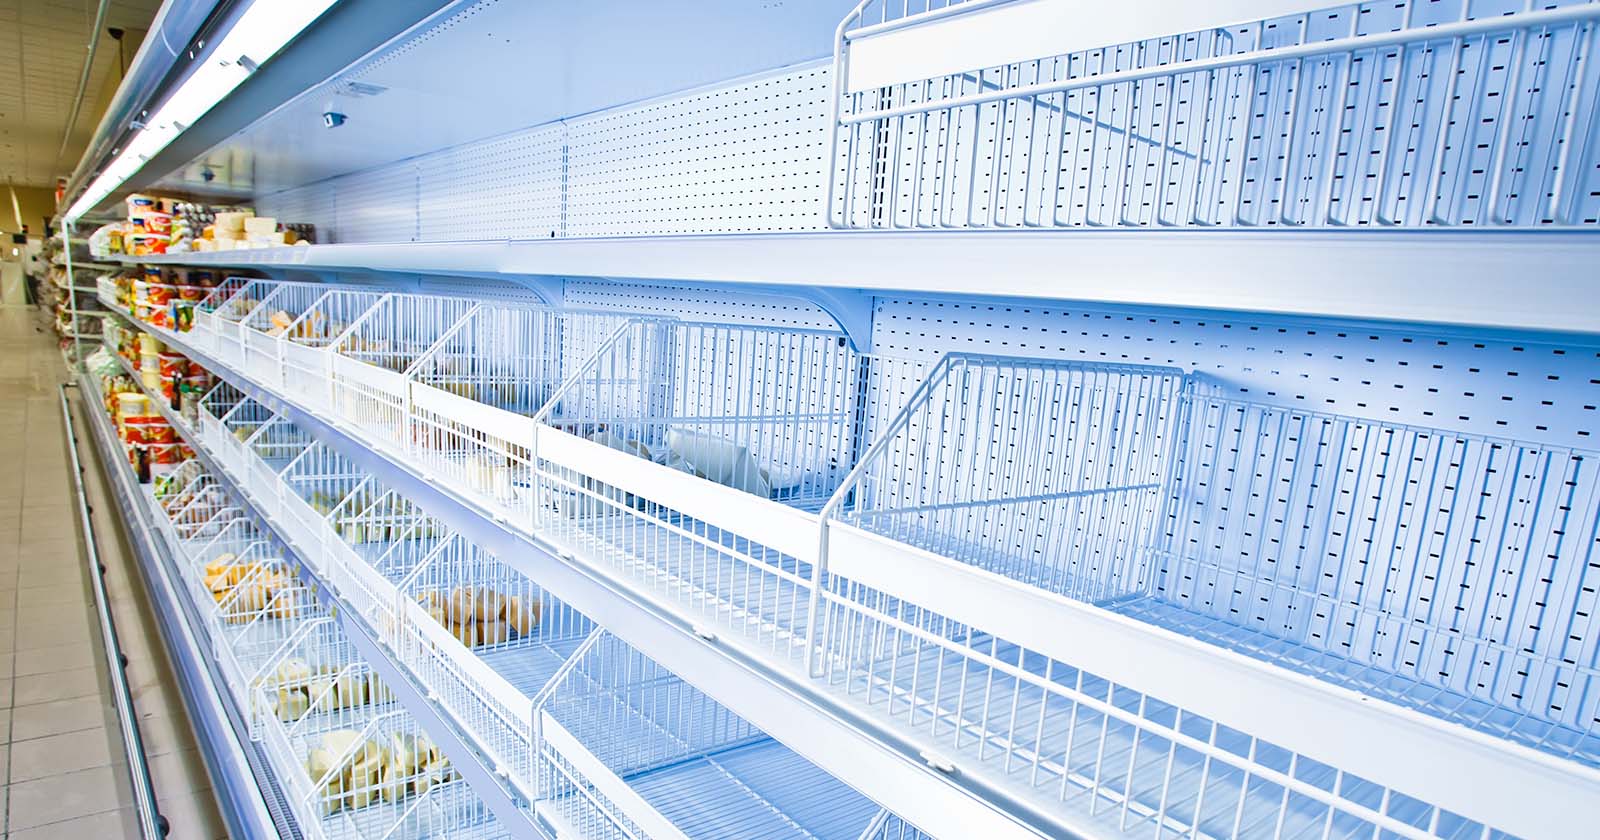 Empty shelves at a grocery store